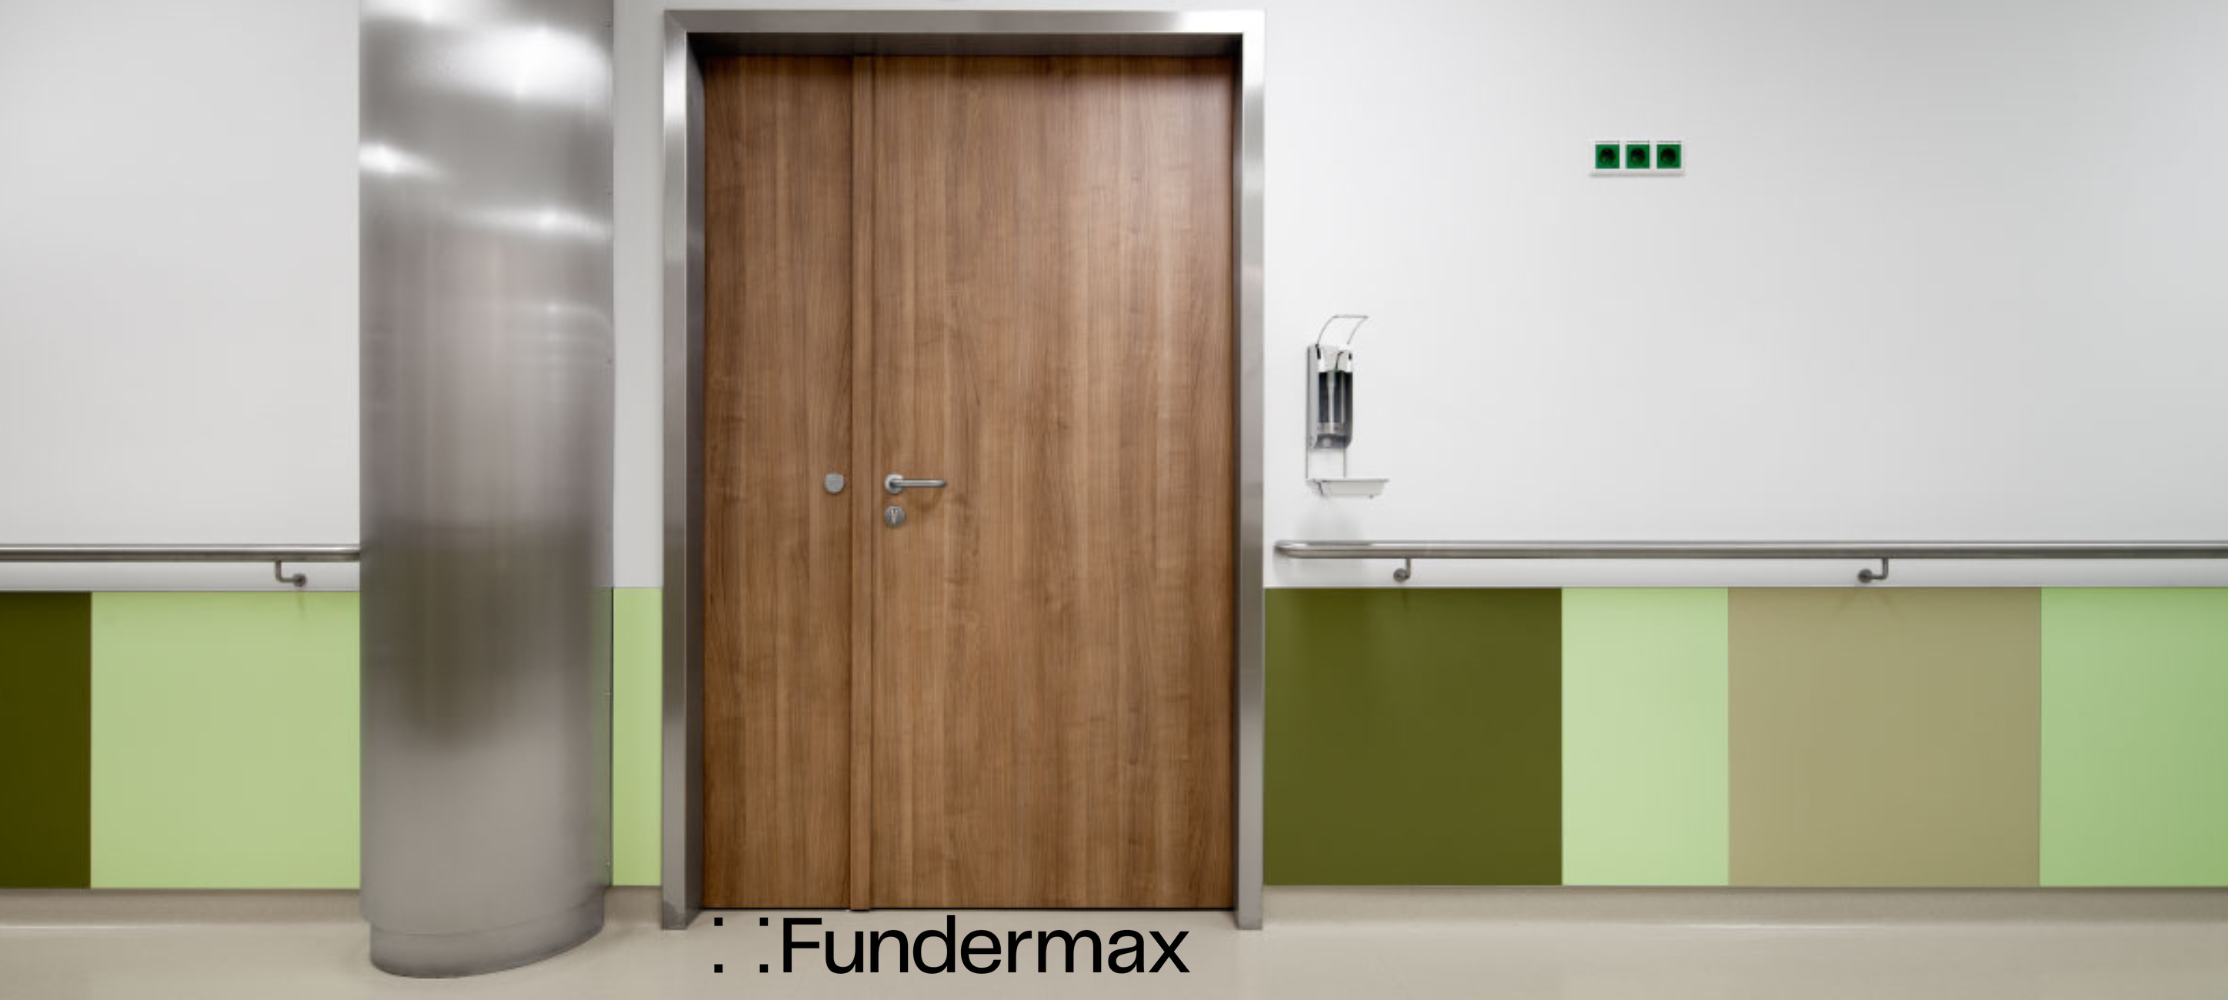 Why Fundermax’s Phenolic Panels Are Double-Sided